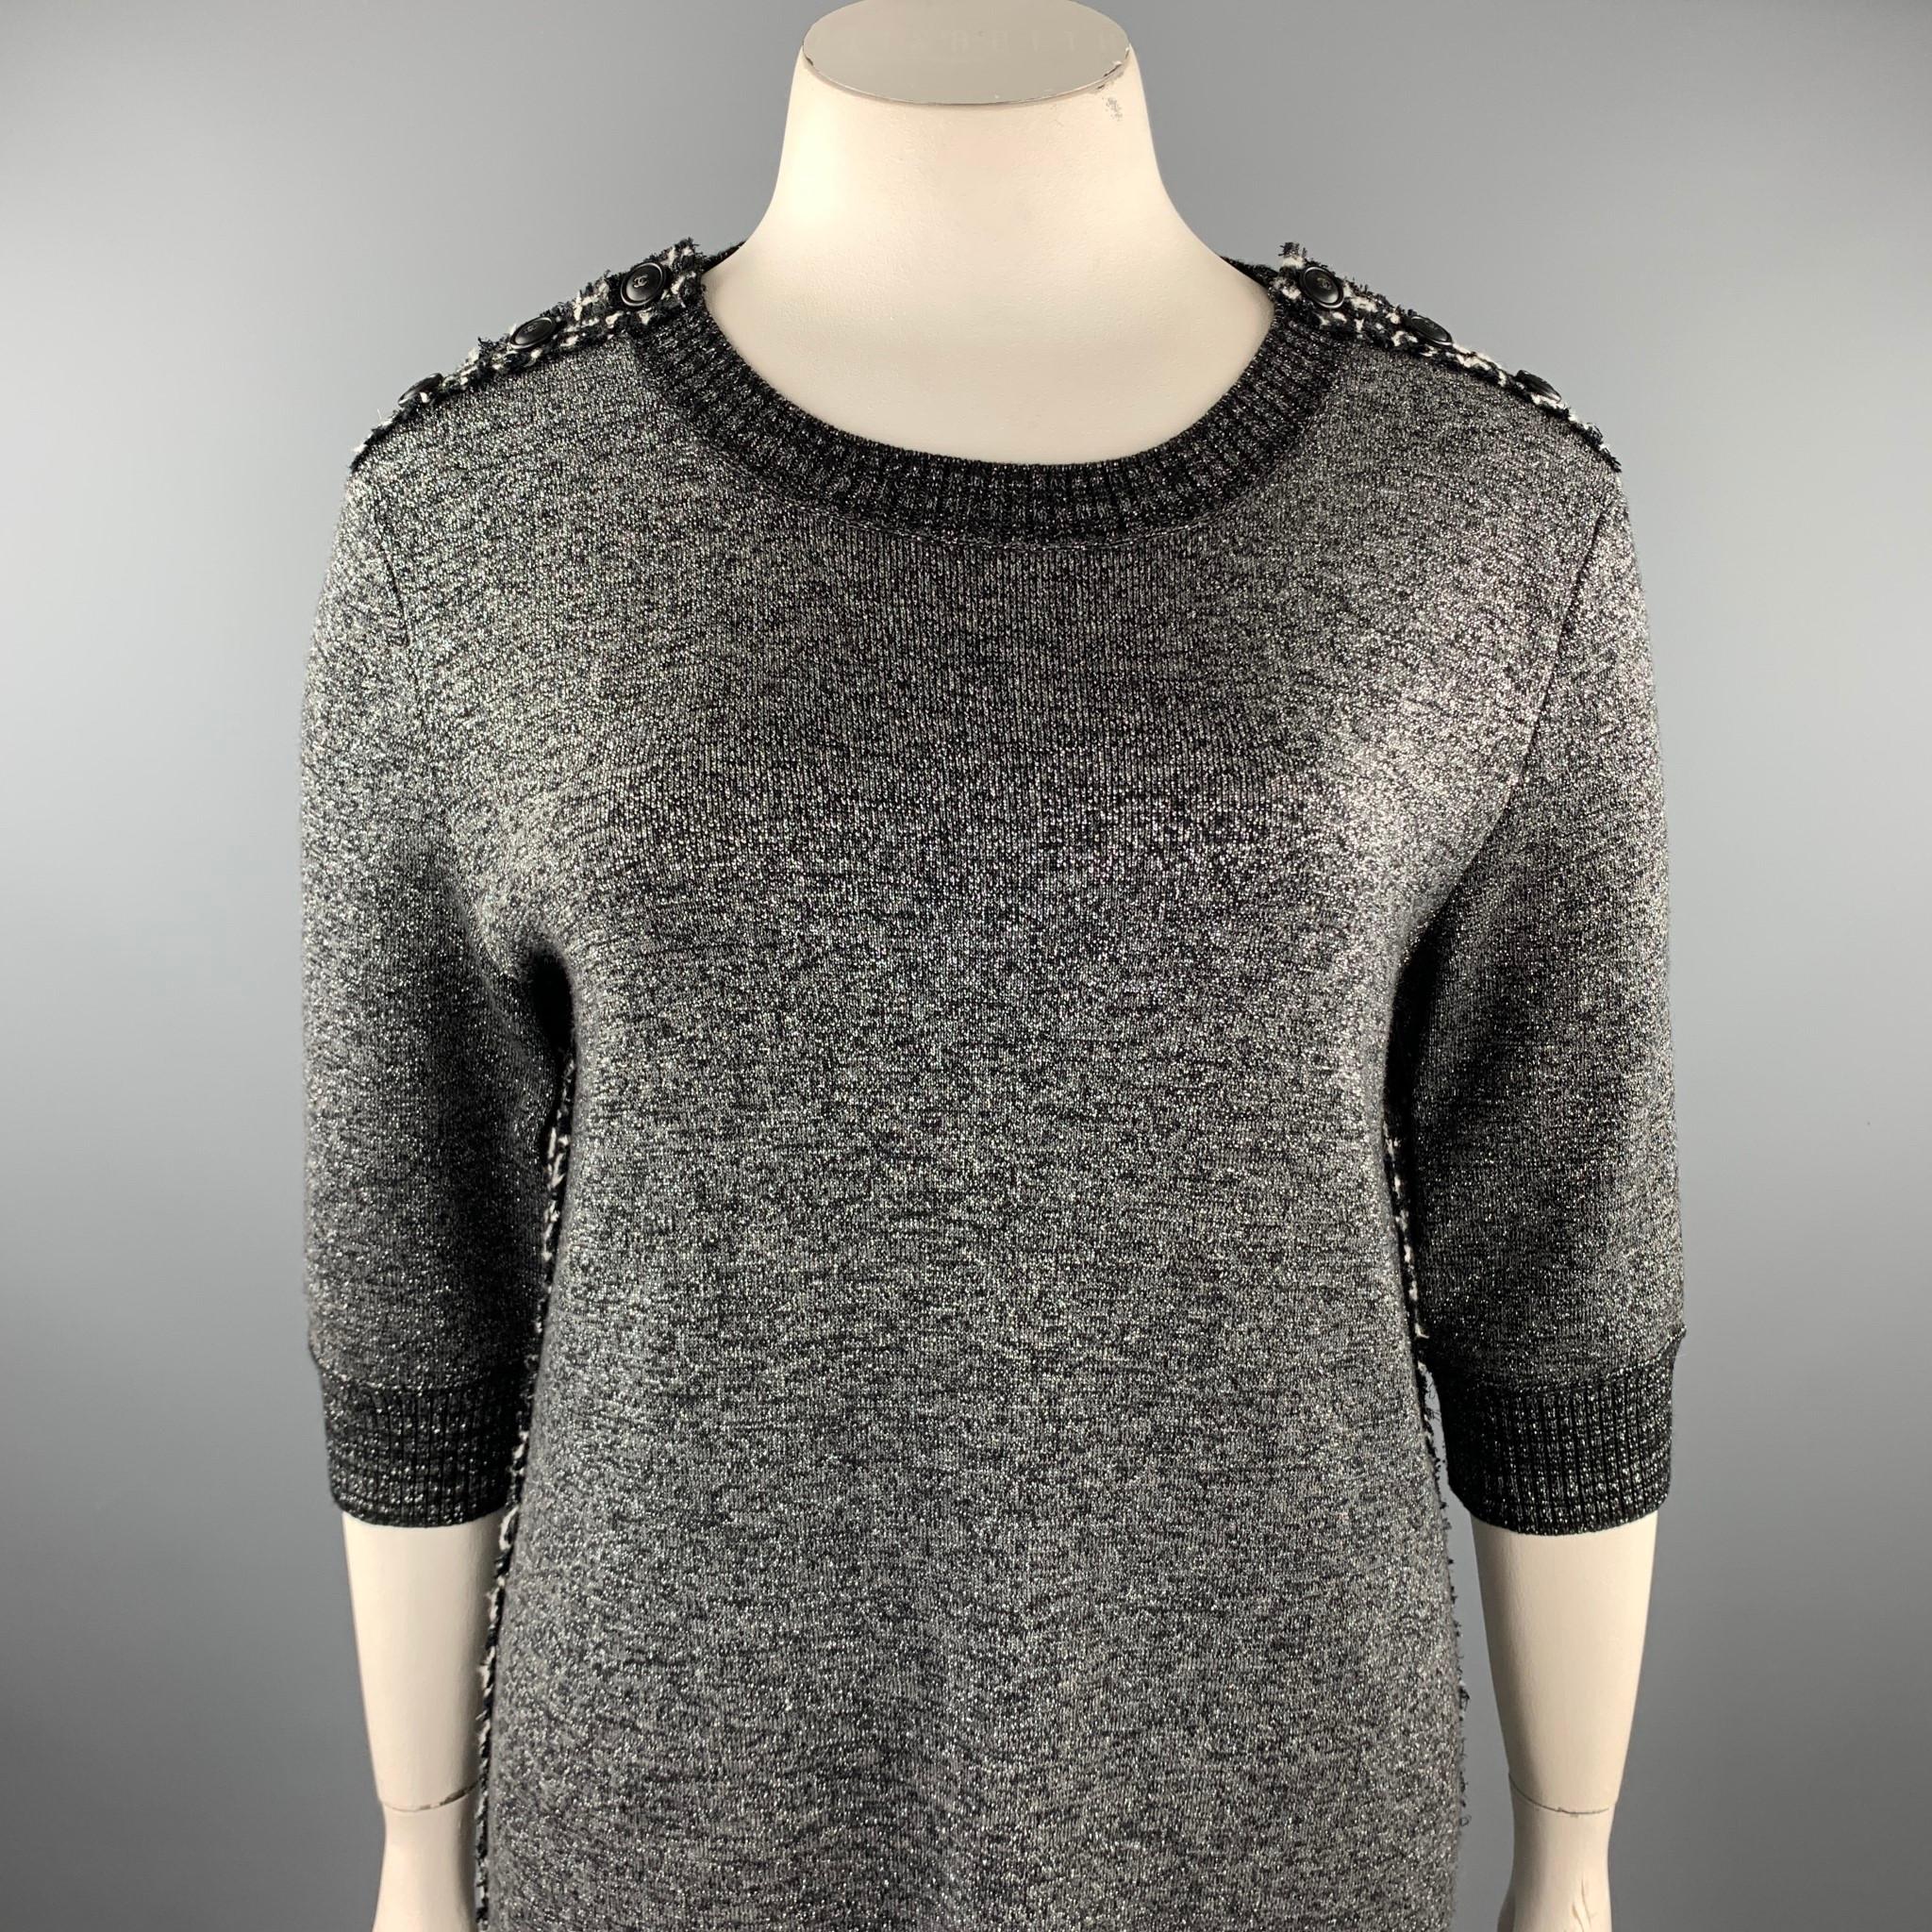 CHANEL dress comes in a silver knitted textured wool blend featuring a shift style, double C button details, 3/4 sleeves, and a wide neck. Made in Italy.

Excellent Pre-Owned Condition.
Marked: 46

Measurements:

Shoulder: 20 in. 
Bust: 44 in.